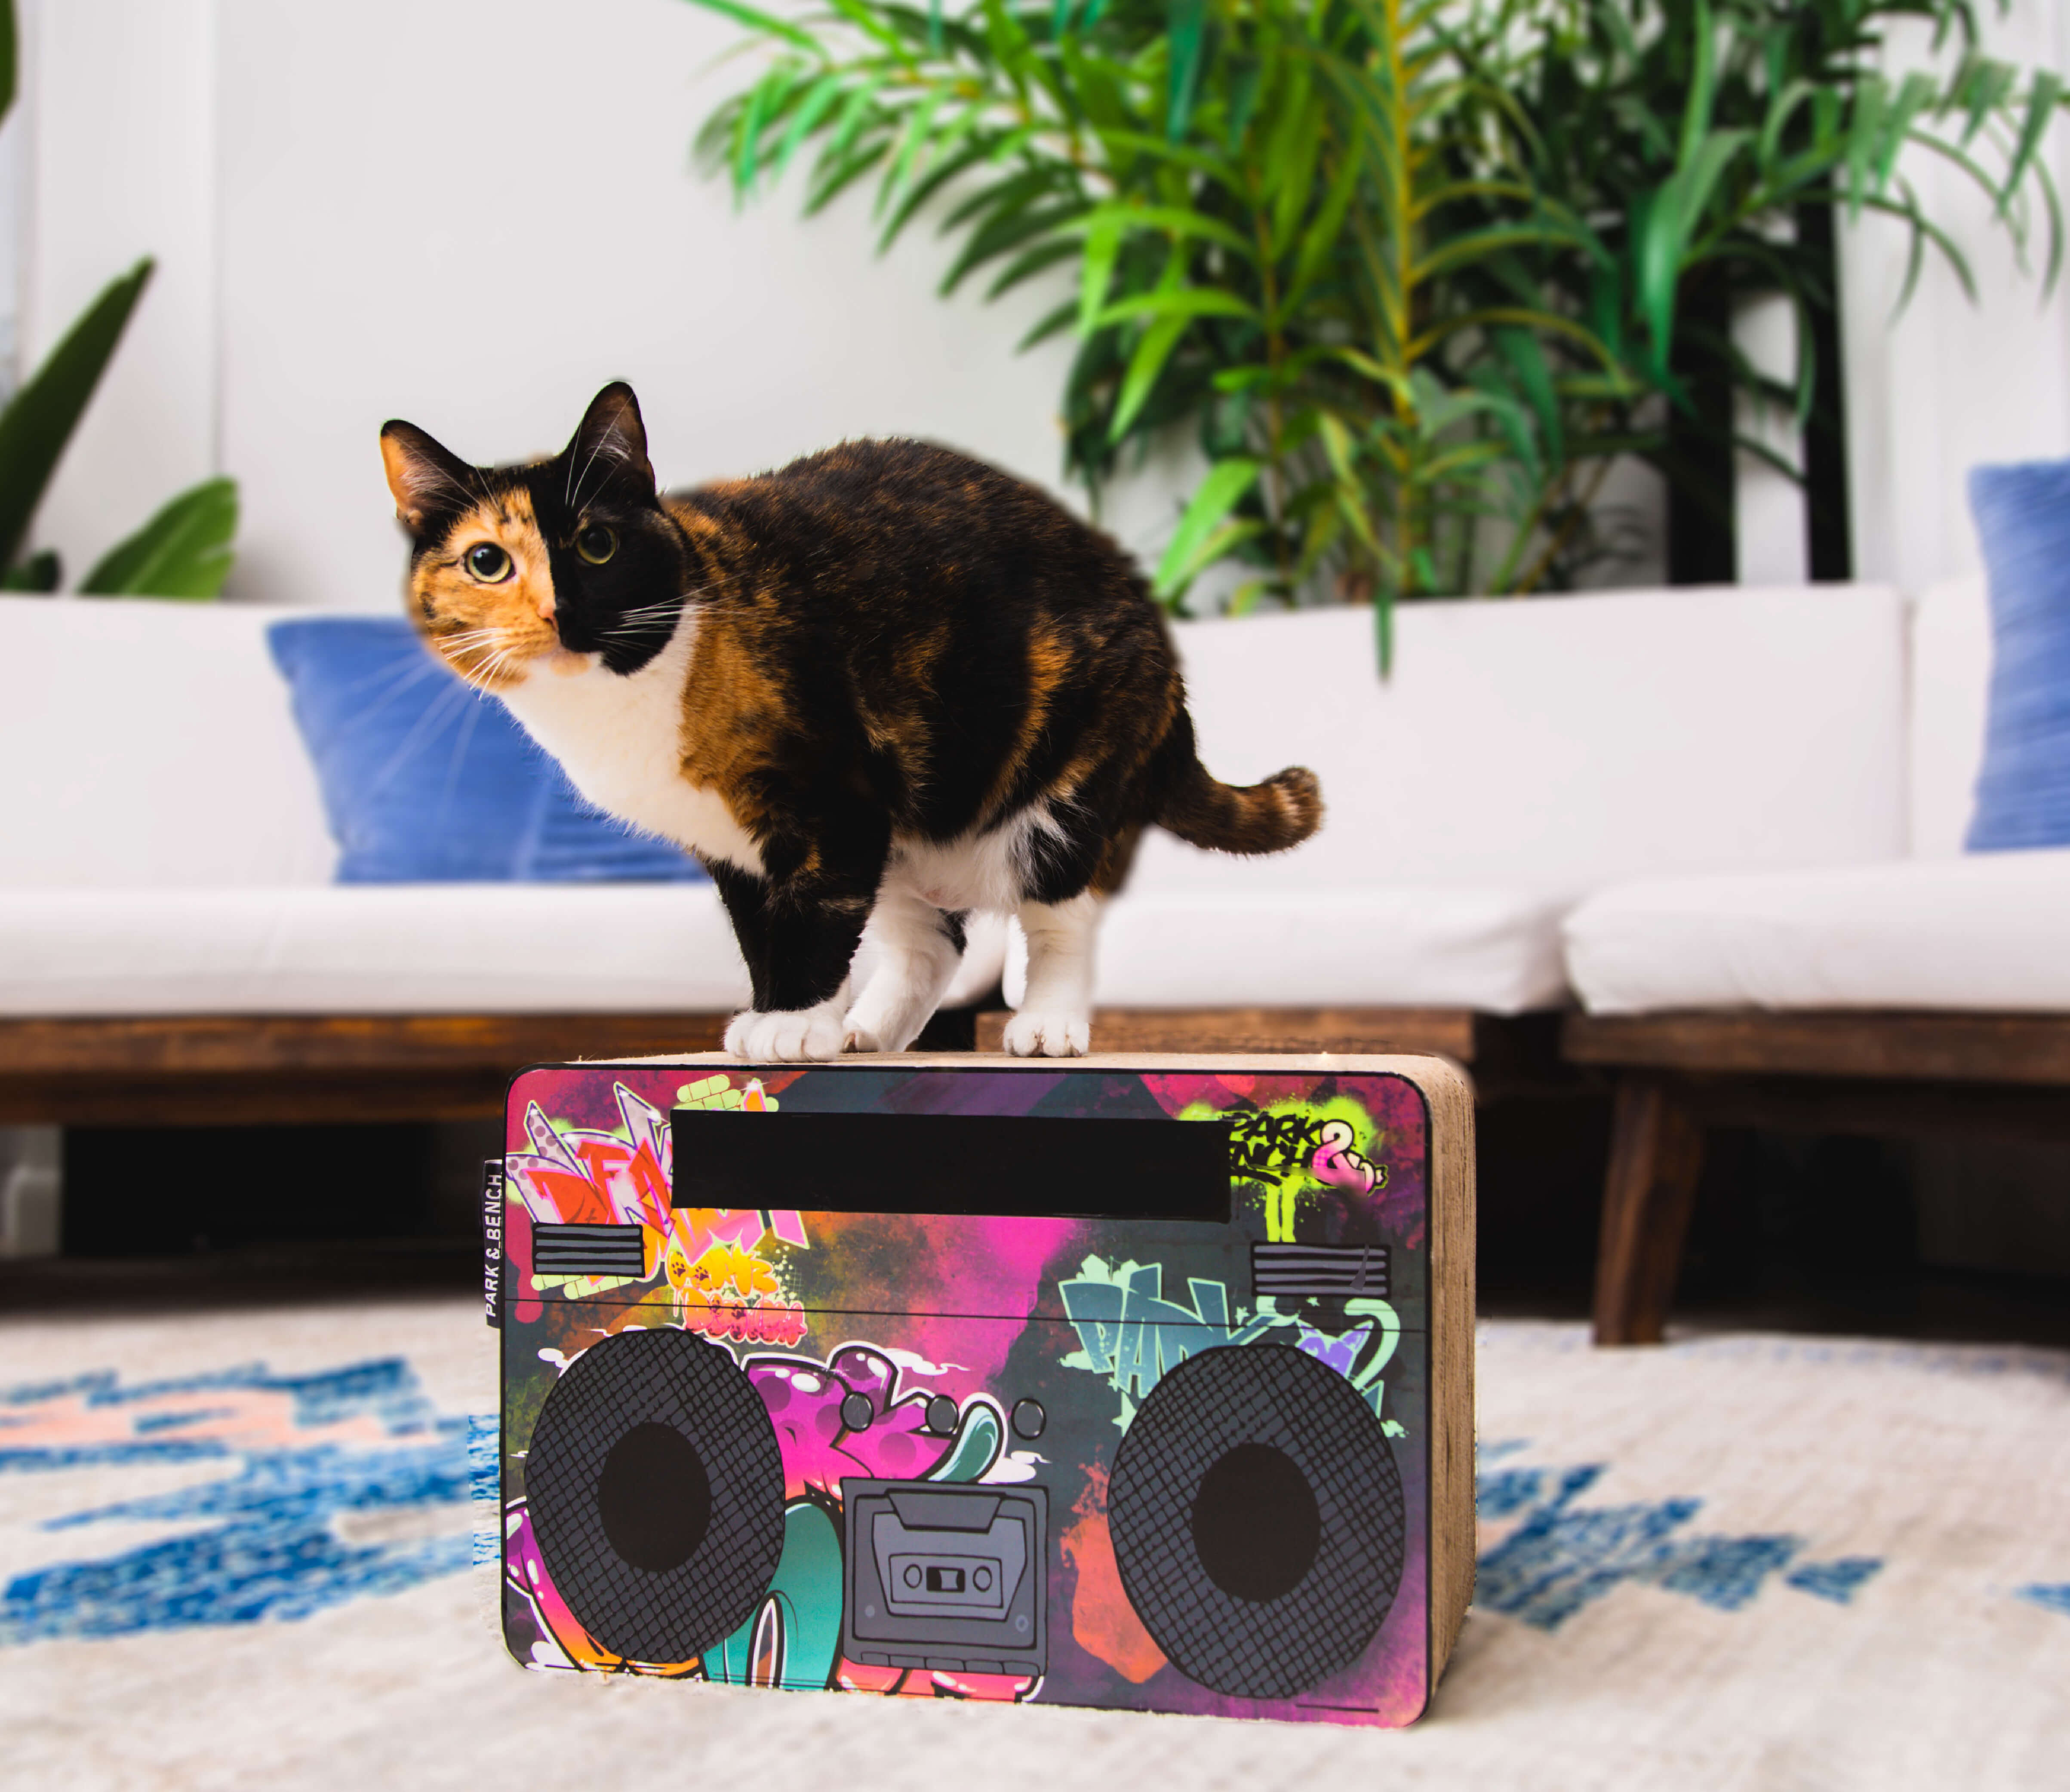 The Jam Master brings the beats of the street to your home. Designed to keep your cat entertained, this cat scratcher goes well in the homes of hip-hop lovers, urbanites, and all kitty lovers with an ear for music.